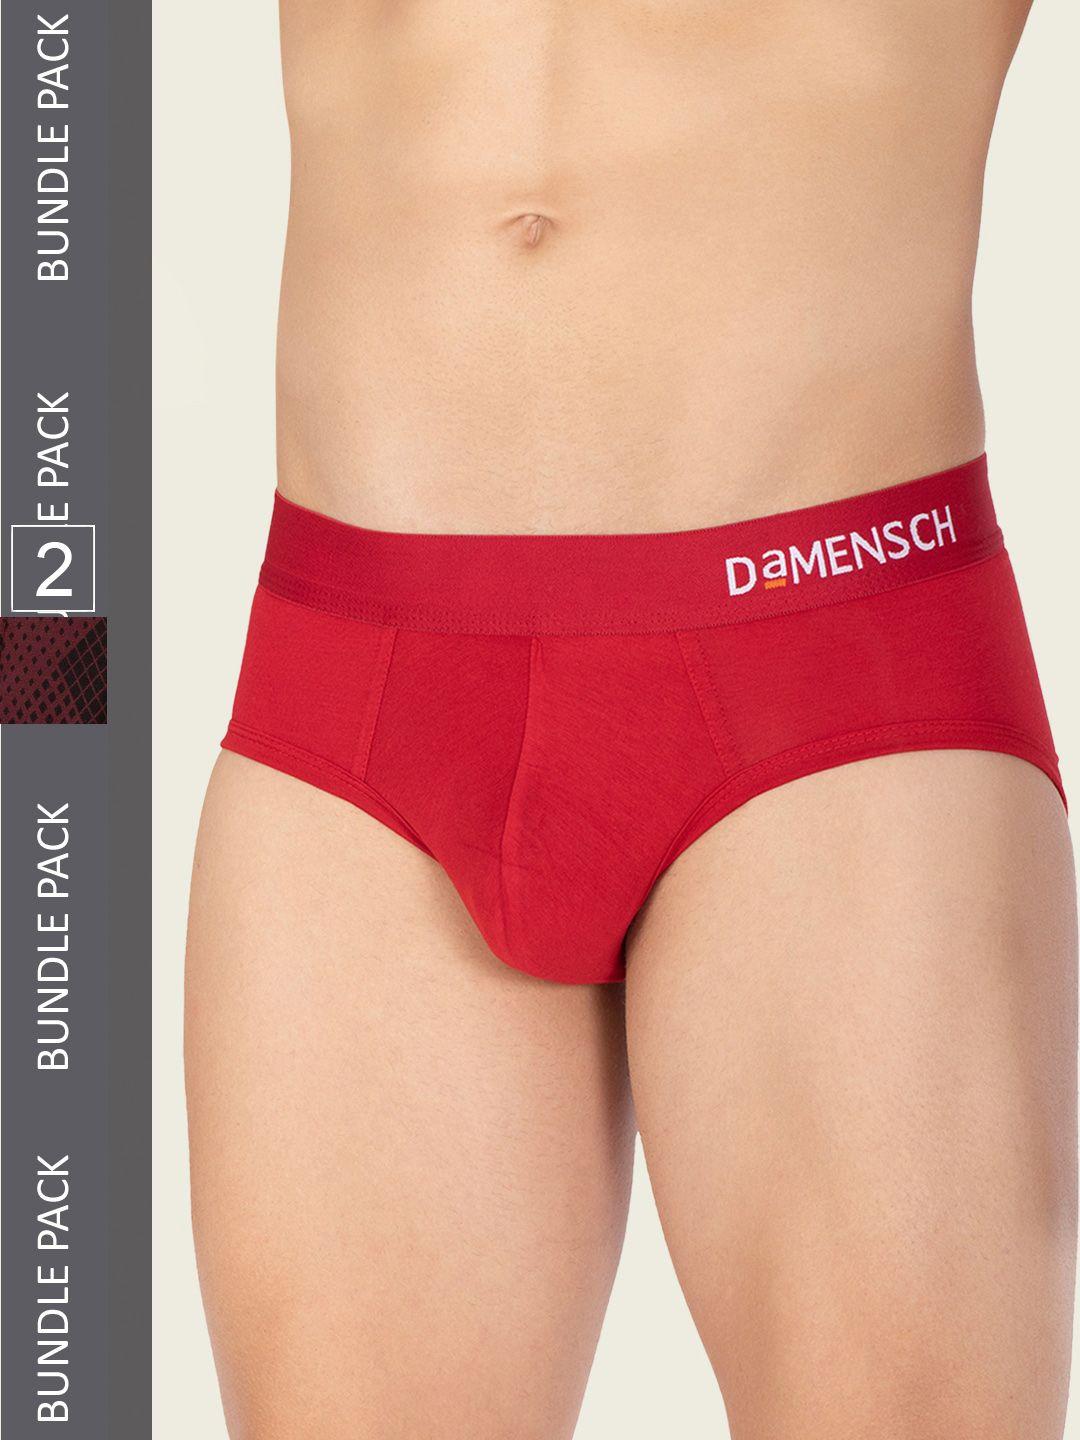 damensch men pack of 2 red & maroon printed deo-soft supima modal briefs